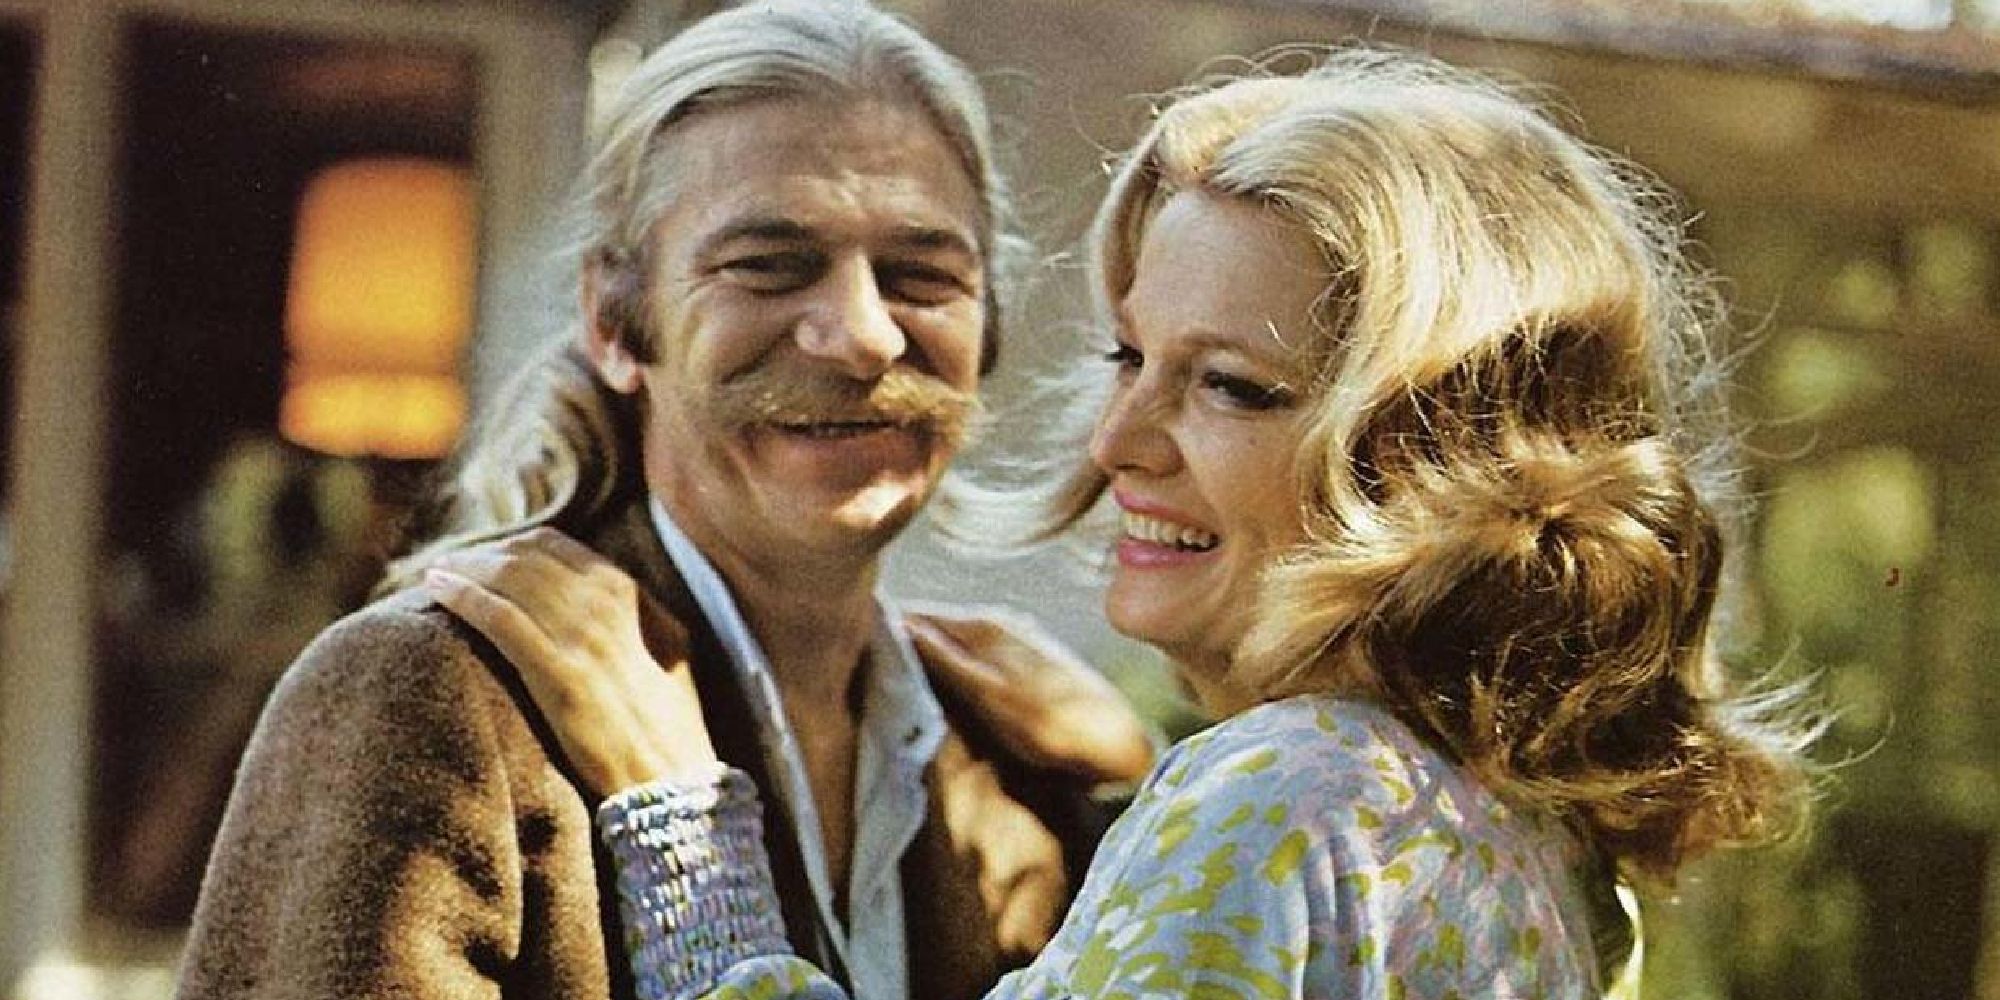 Seymour Cassel and Gena Rowlands in Minnie and Moskowitz